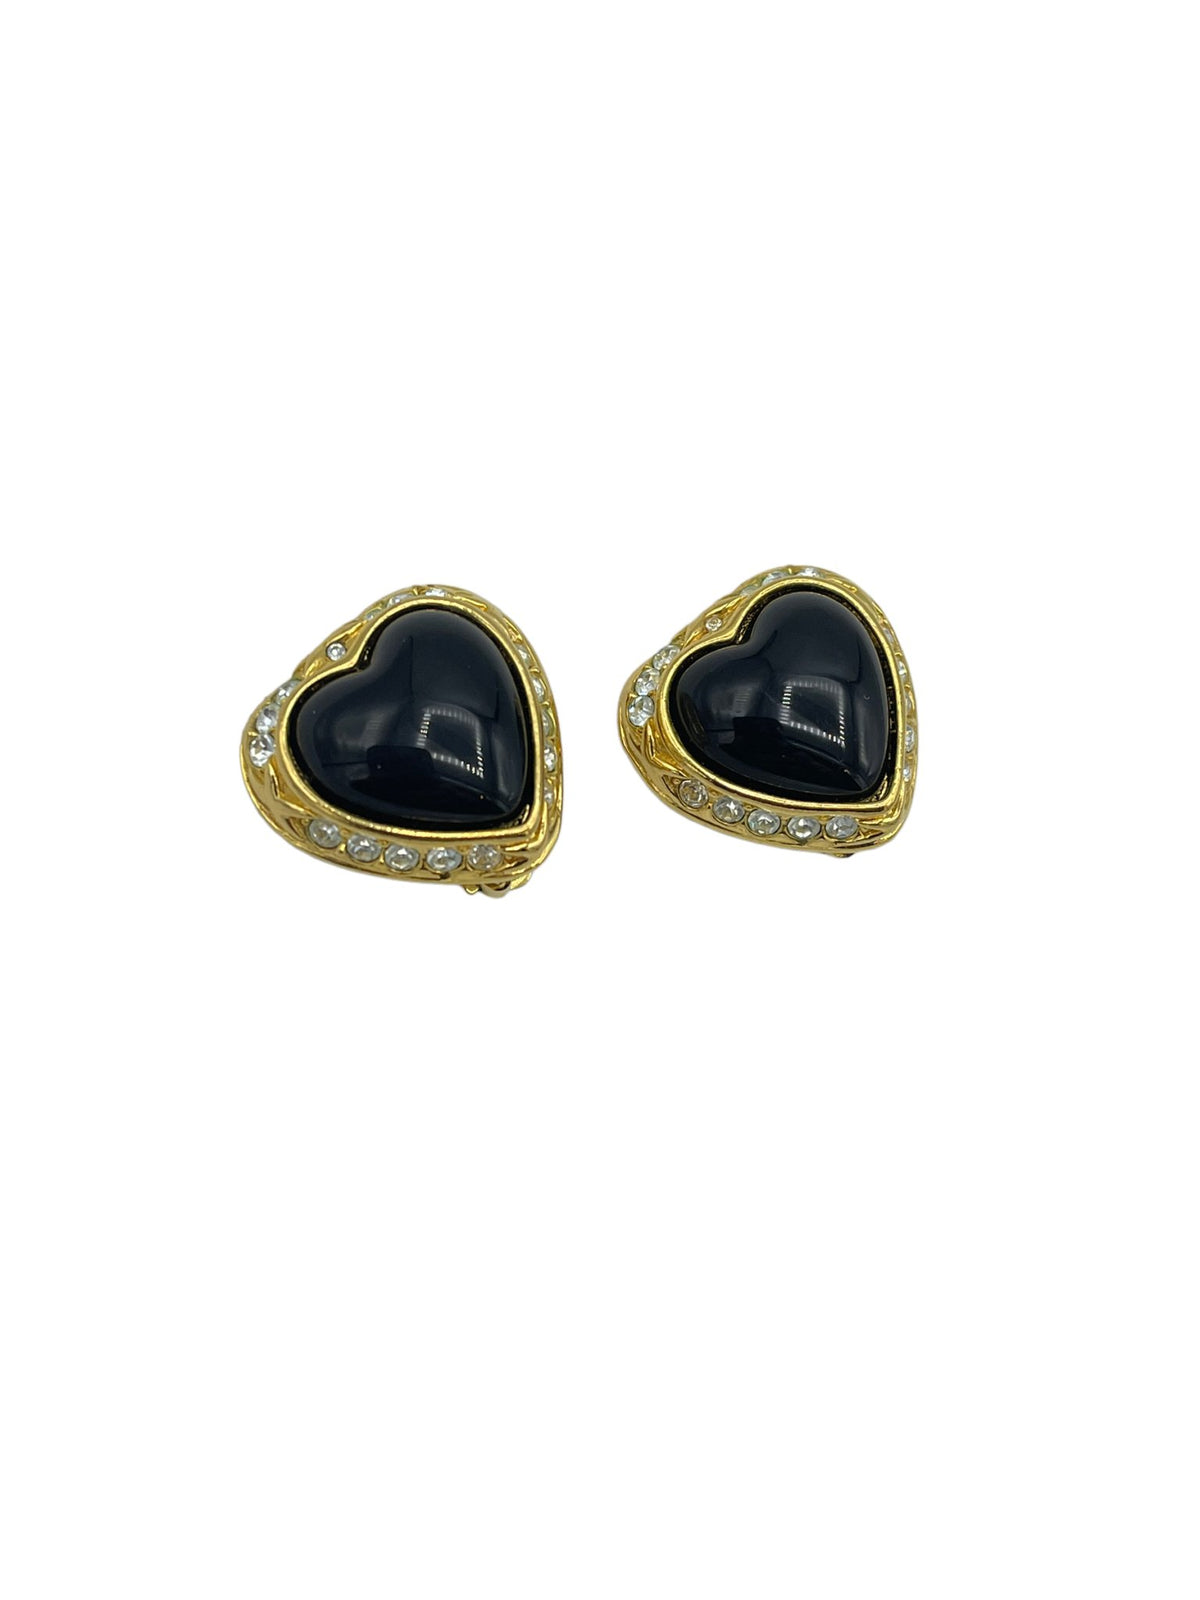 Classic Joan Rivers Black Heart Vintage Clip-On Earrings - 24 Wishes Vintage Jewelry